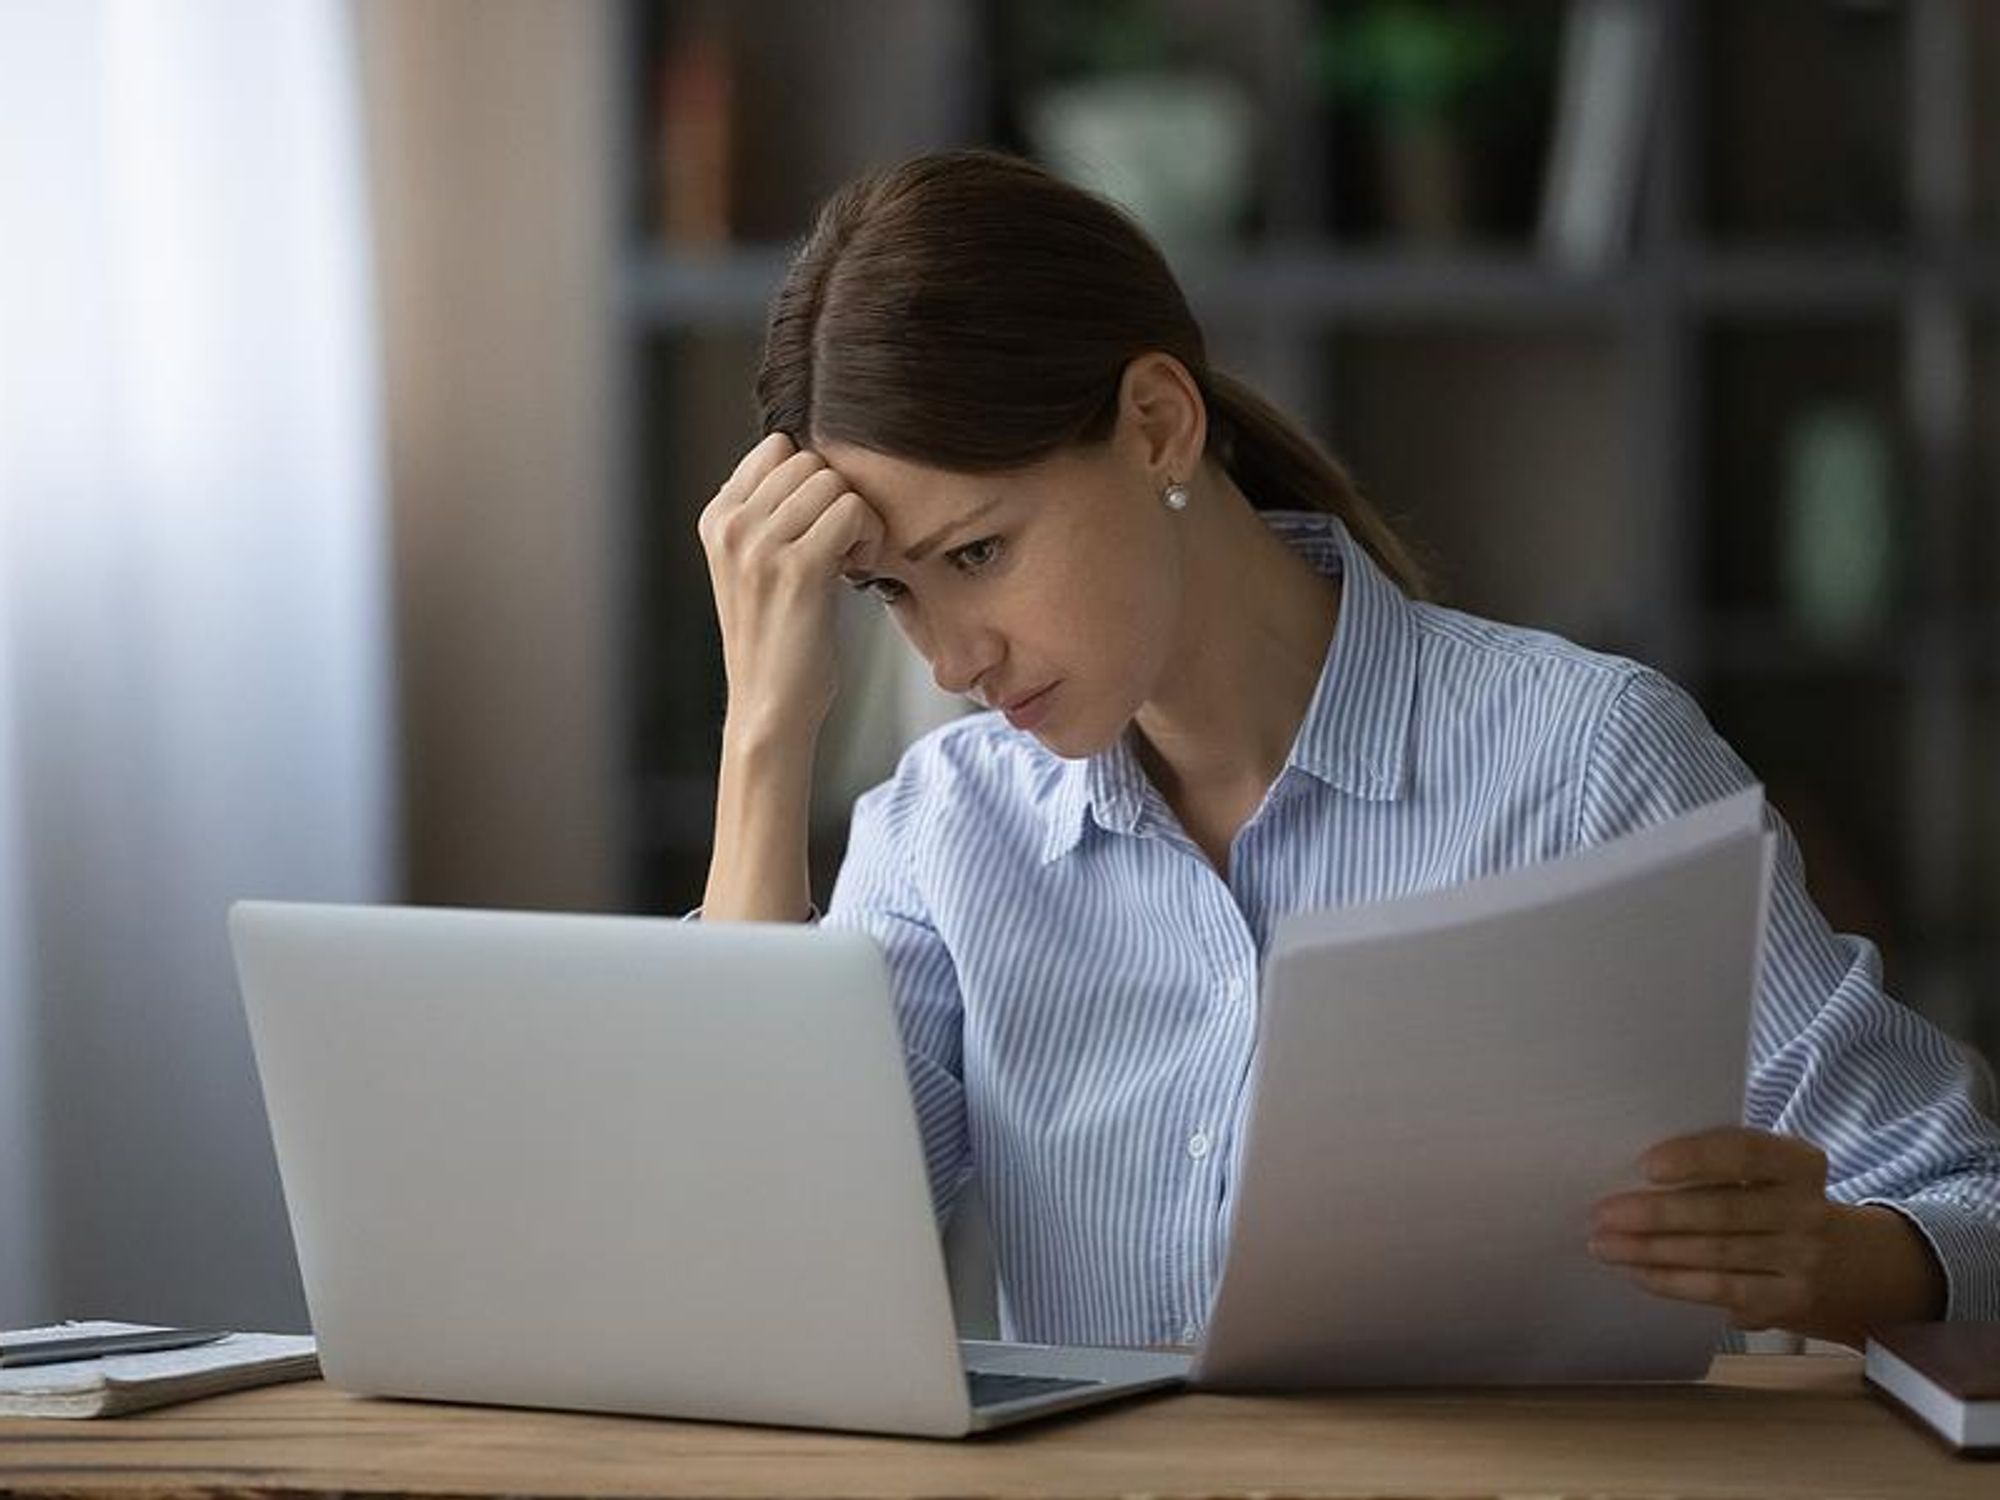 Woman stressed about work